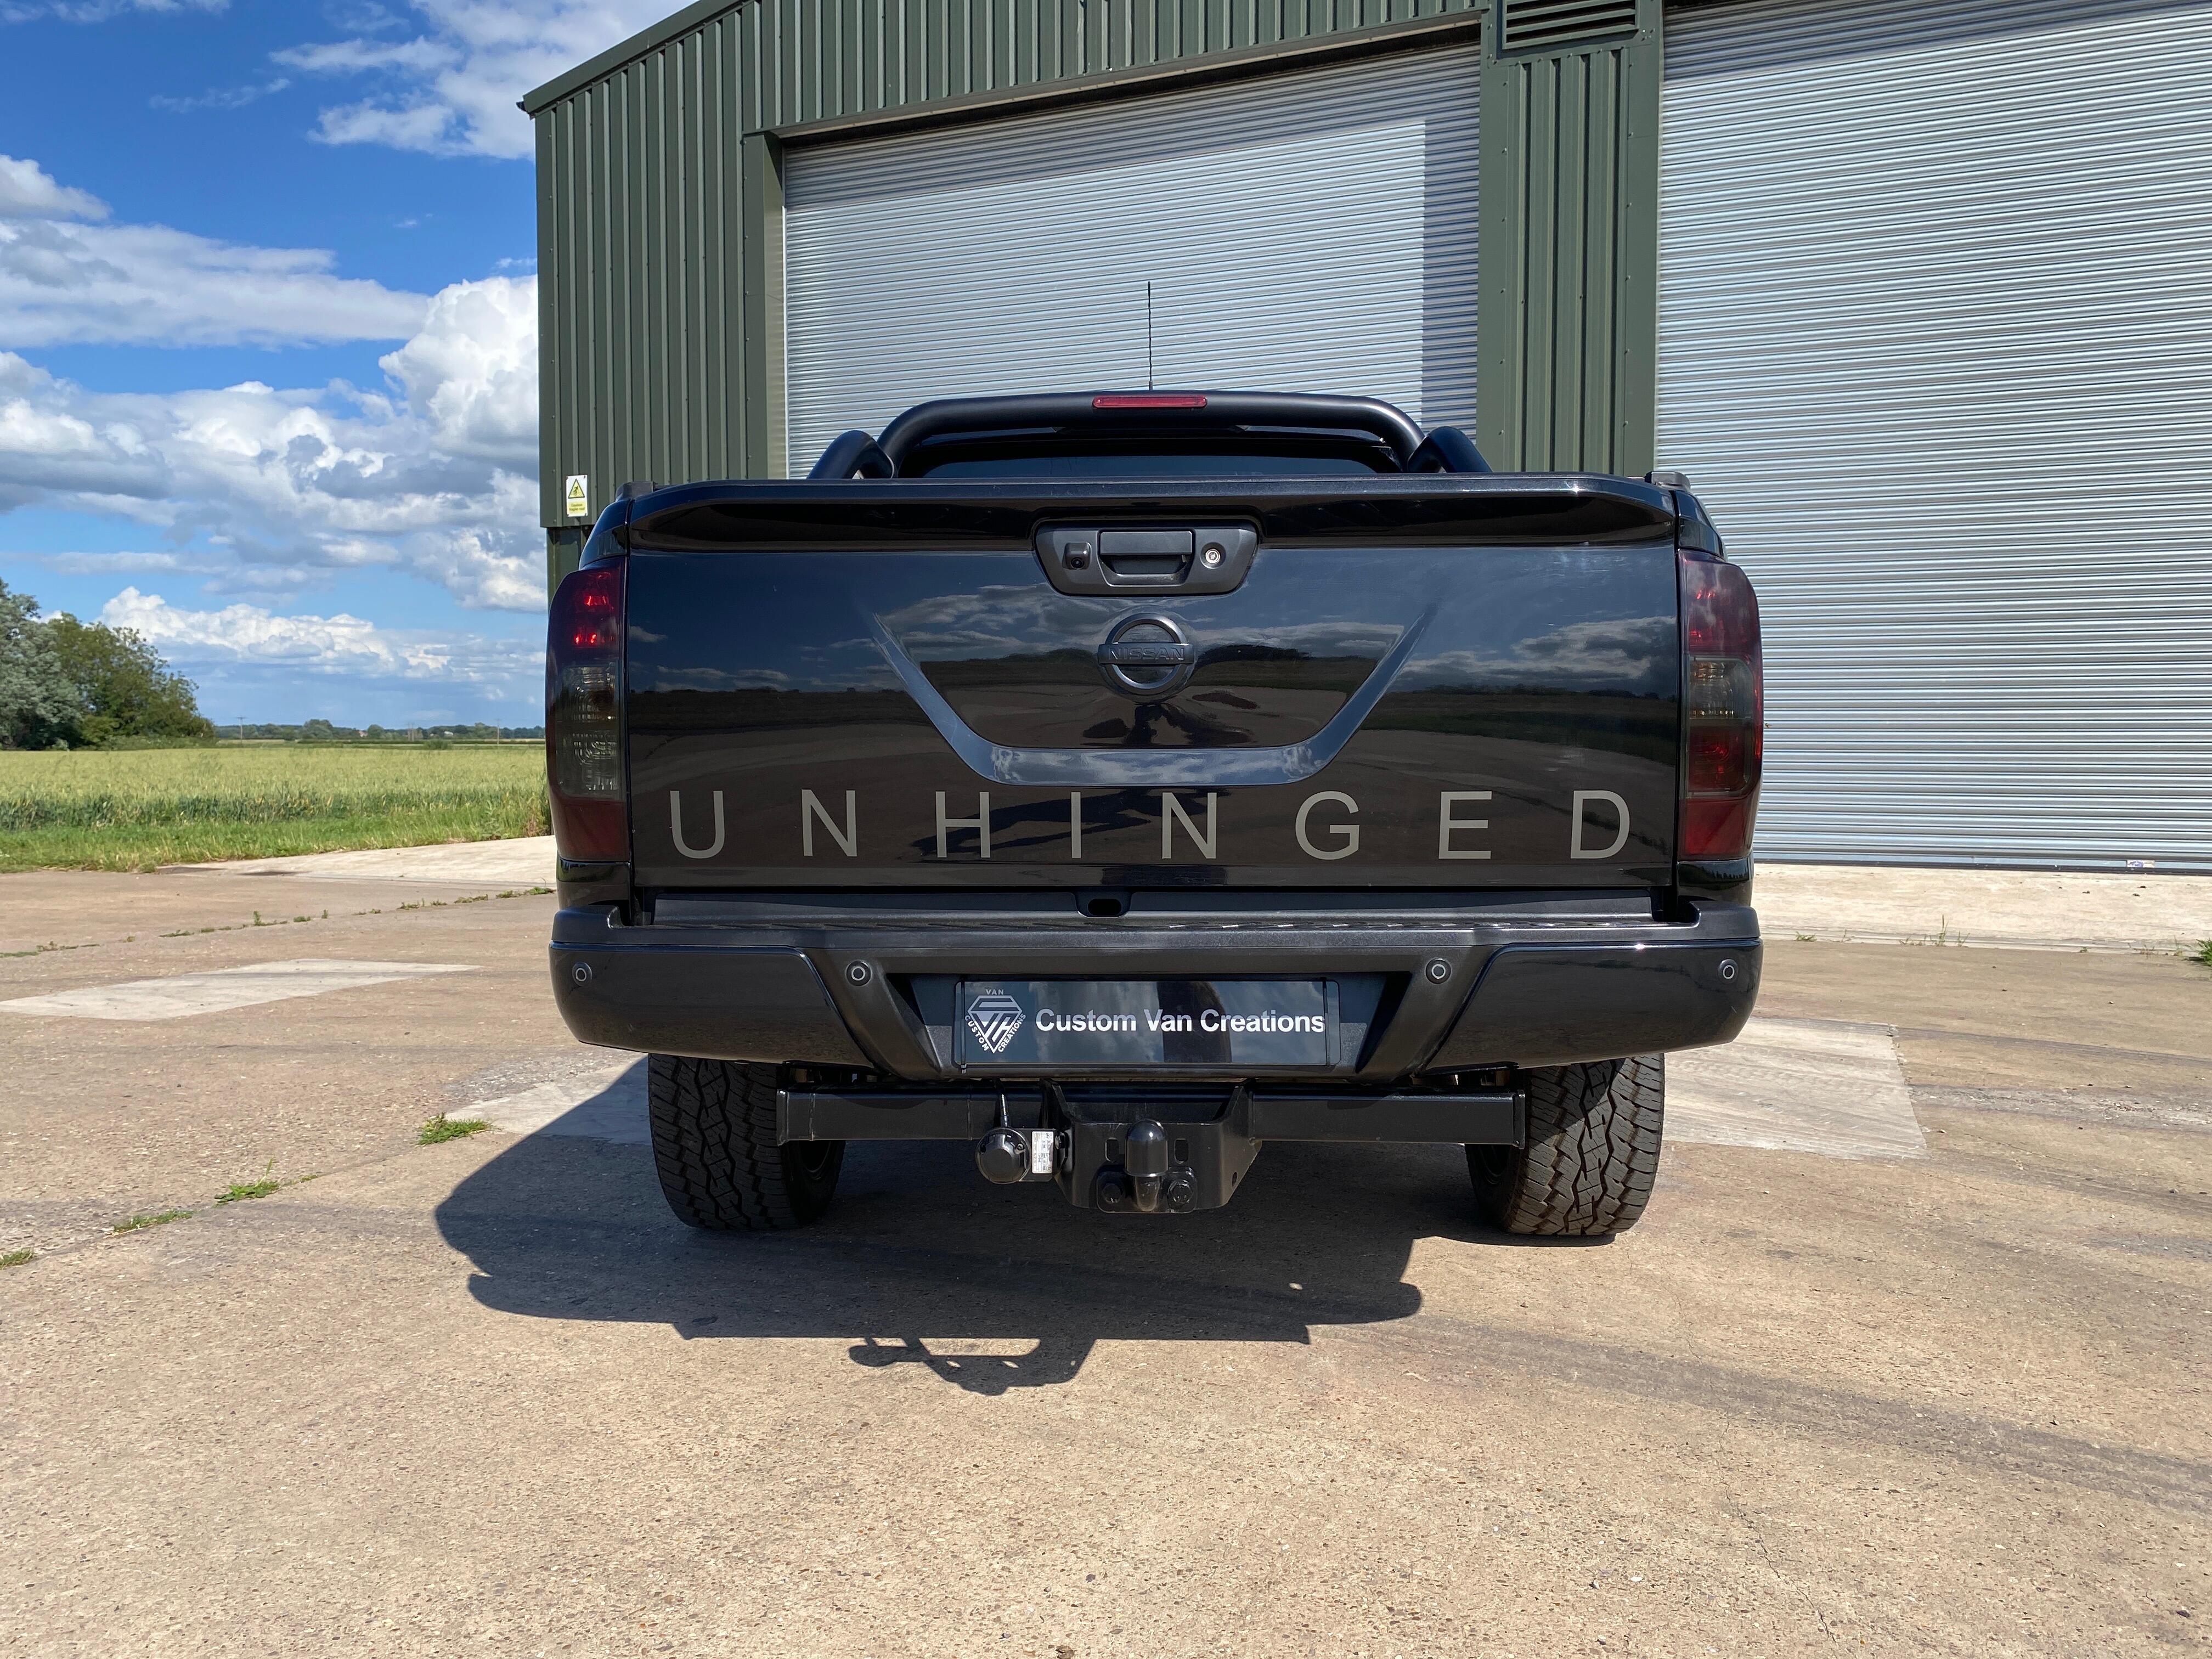 2021 - UNHINGED Limited Nissan Navara Double Cab Pickup - Wide Trax